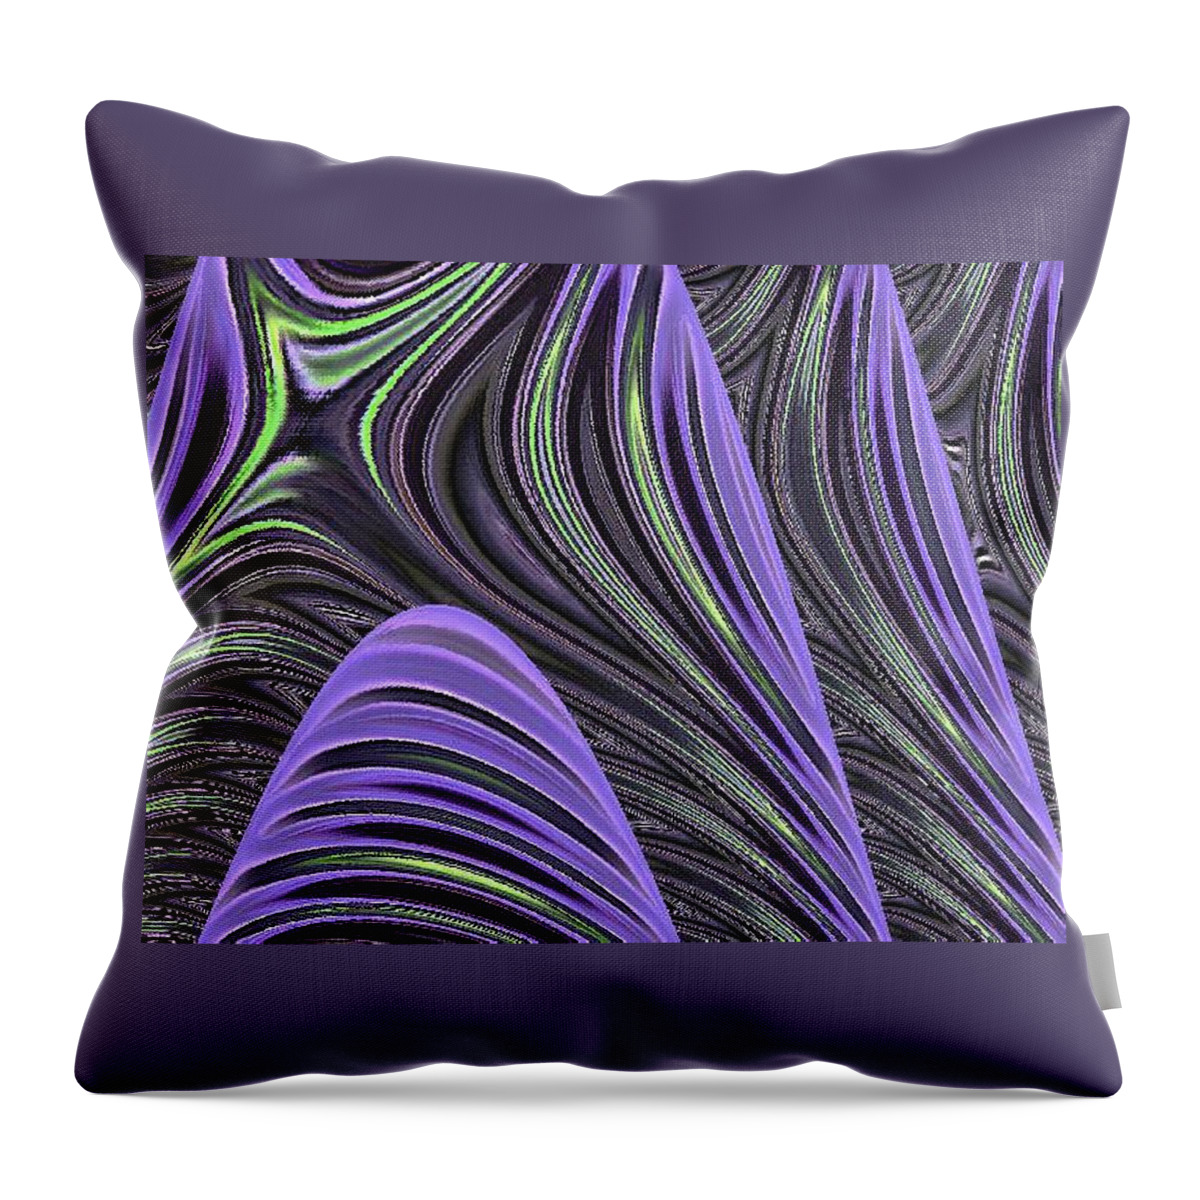 Abstract Throw Pillow featuring the digital art Mountains Abstract by Ronald Mills